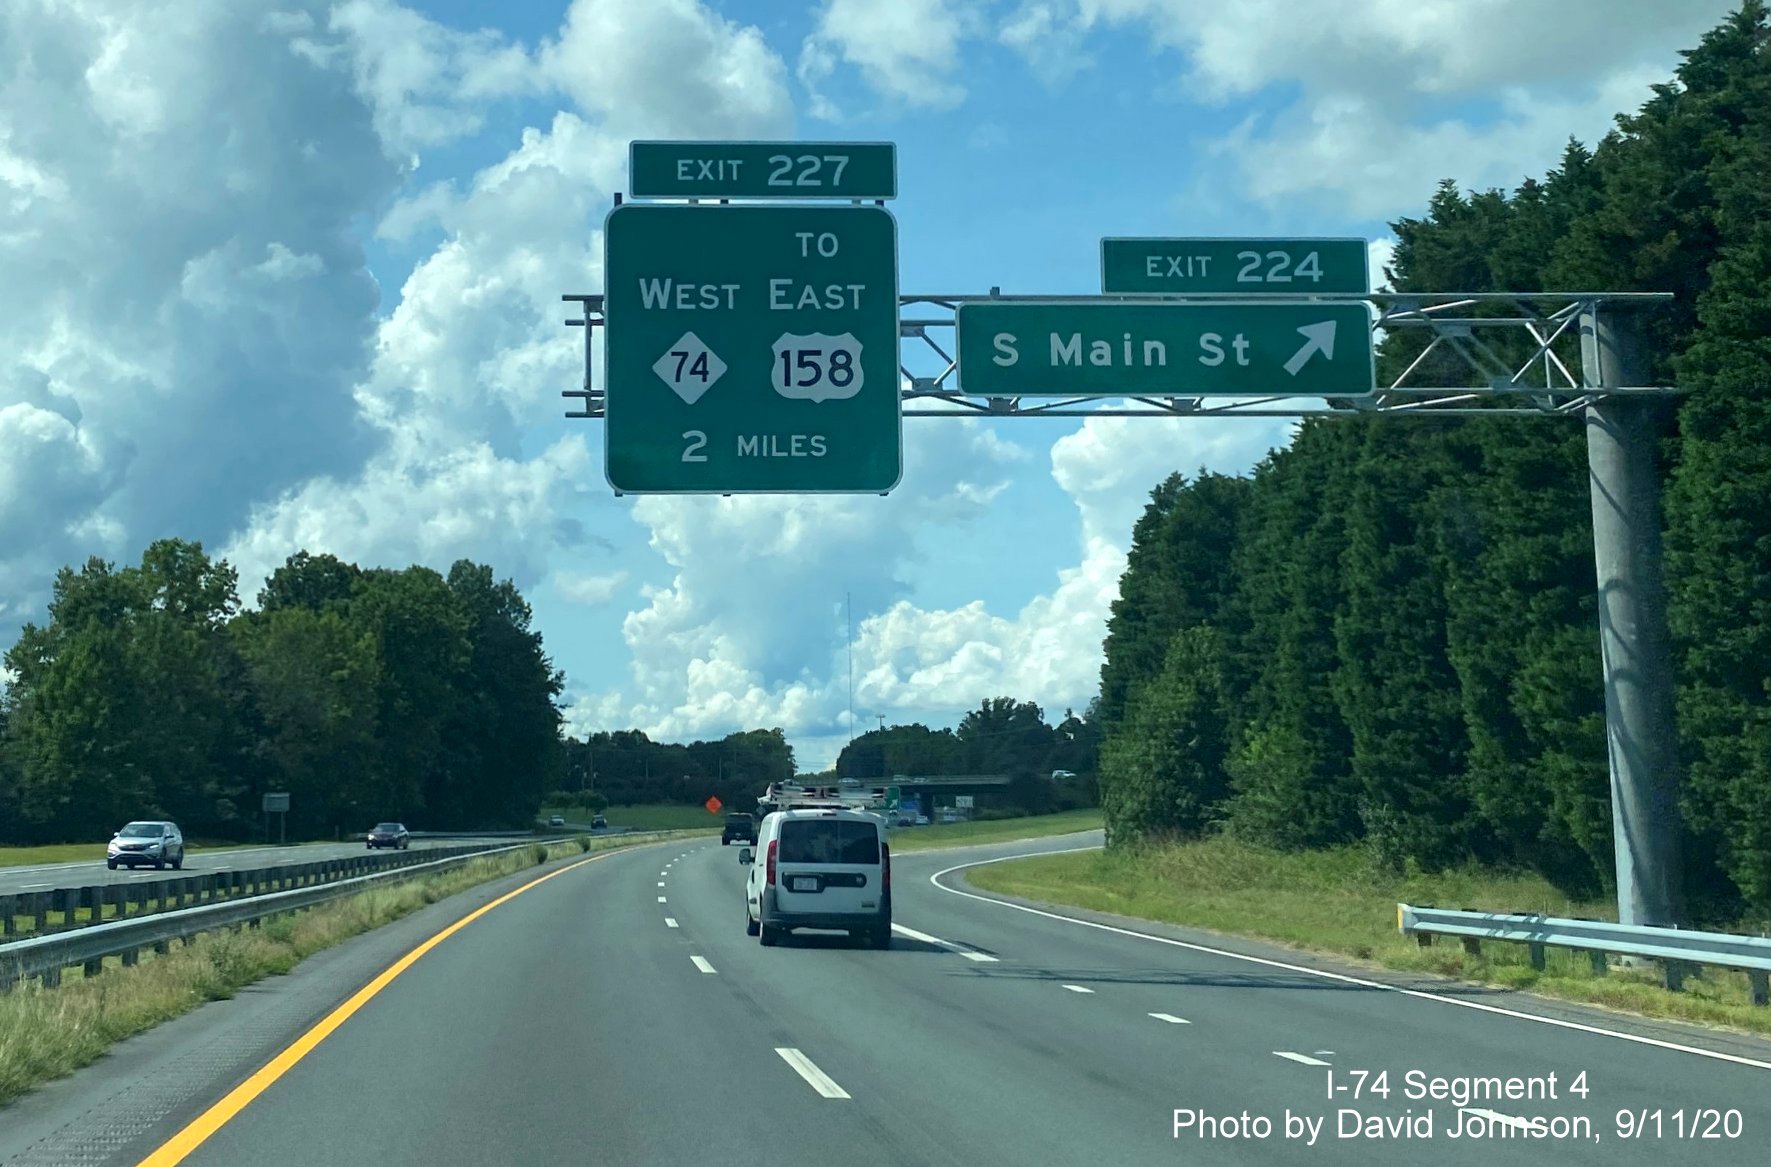 Image of newly uncovered 2 miles advance sign for NC 74 West Winston Salem Northern Beltway on US 421 North, by David Johnson September 2020